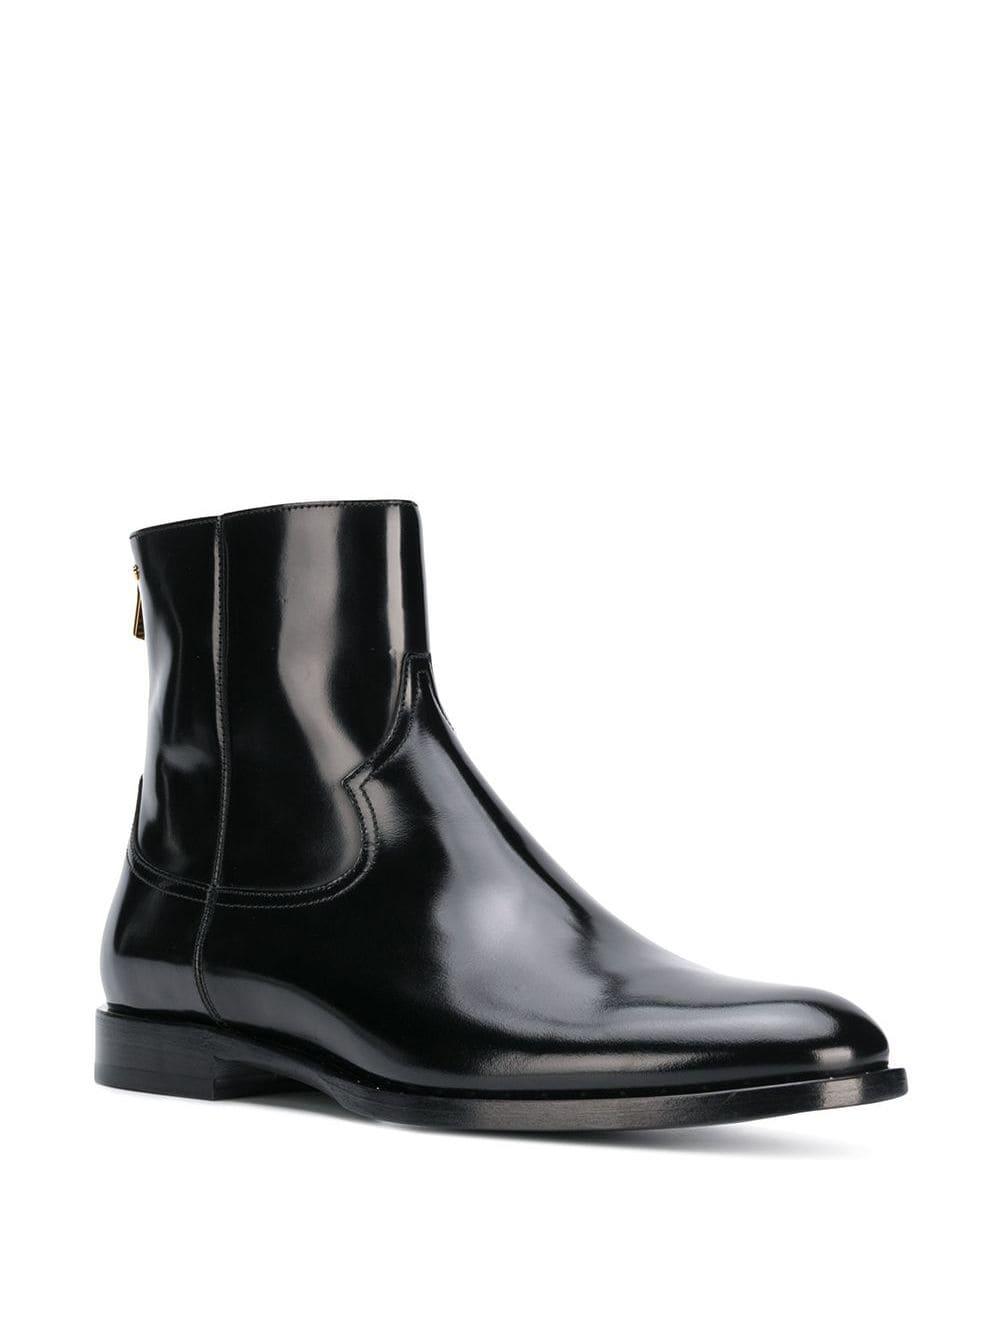 Dolce & Gabbana Leather Chelsea Ankle Boots in Black for Men - Lyst